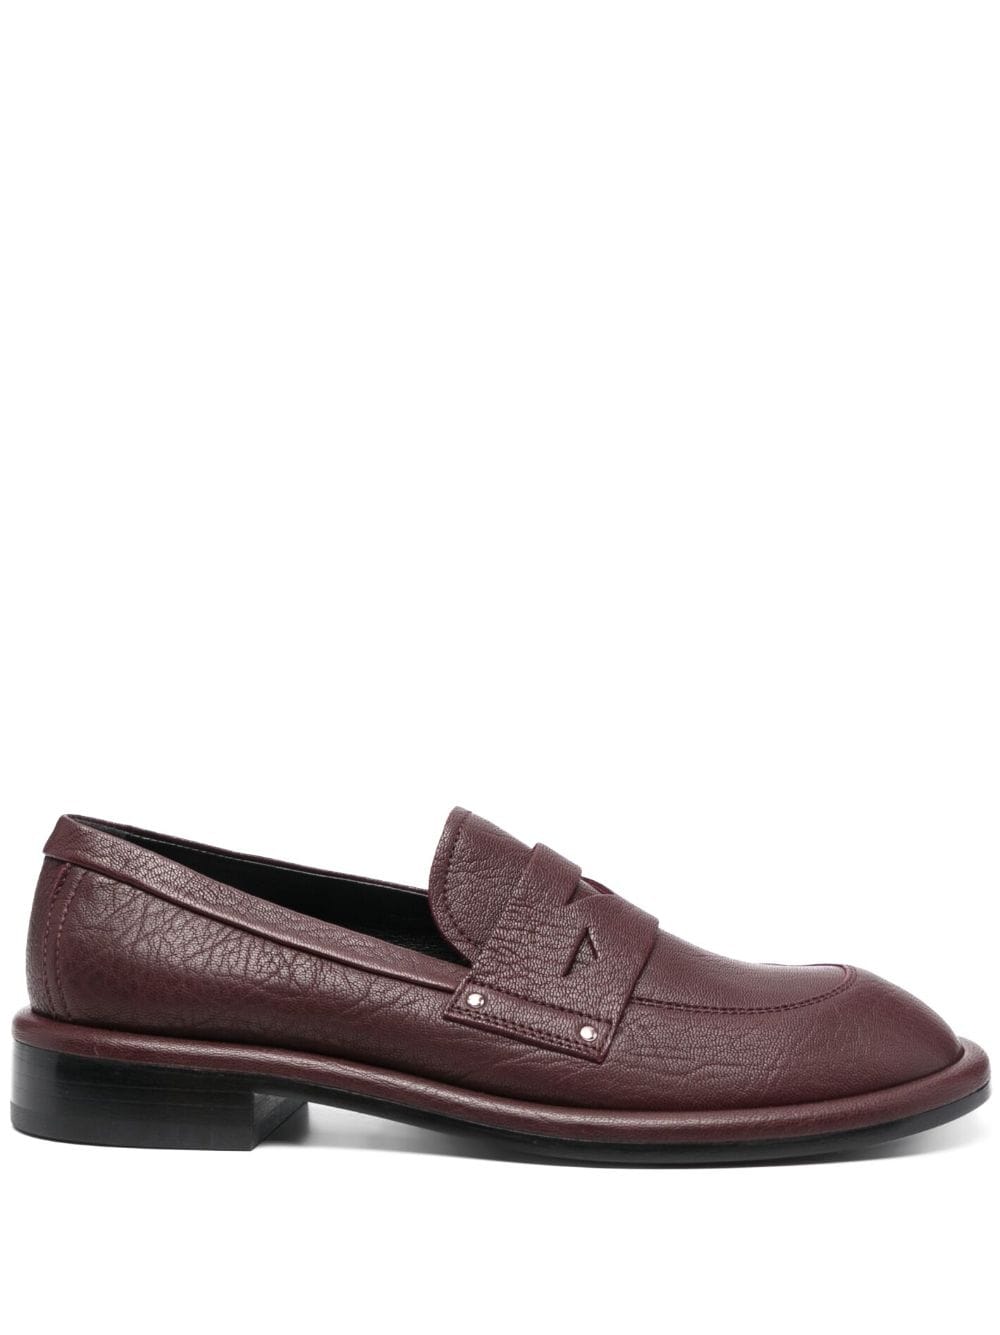 AGL Alison 30mm leather loafers - Red von AGL